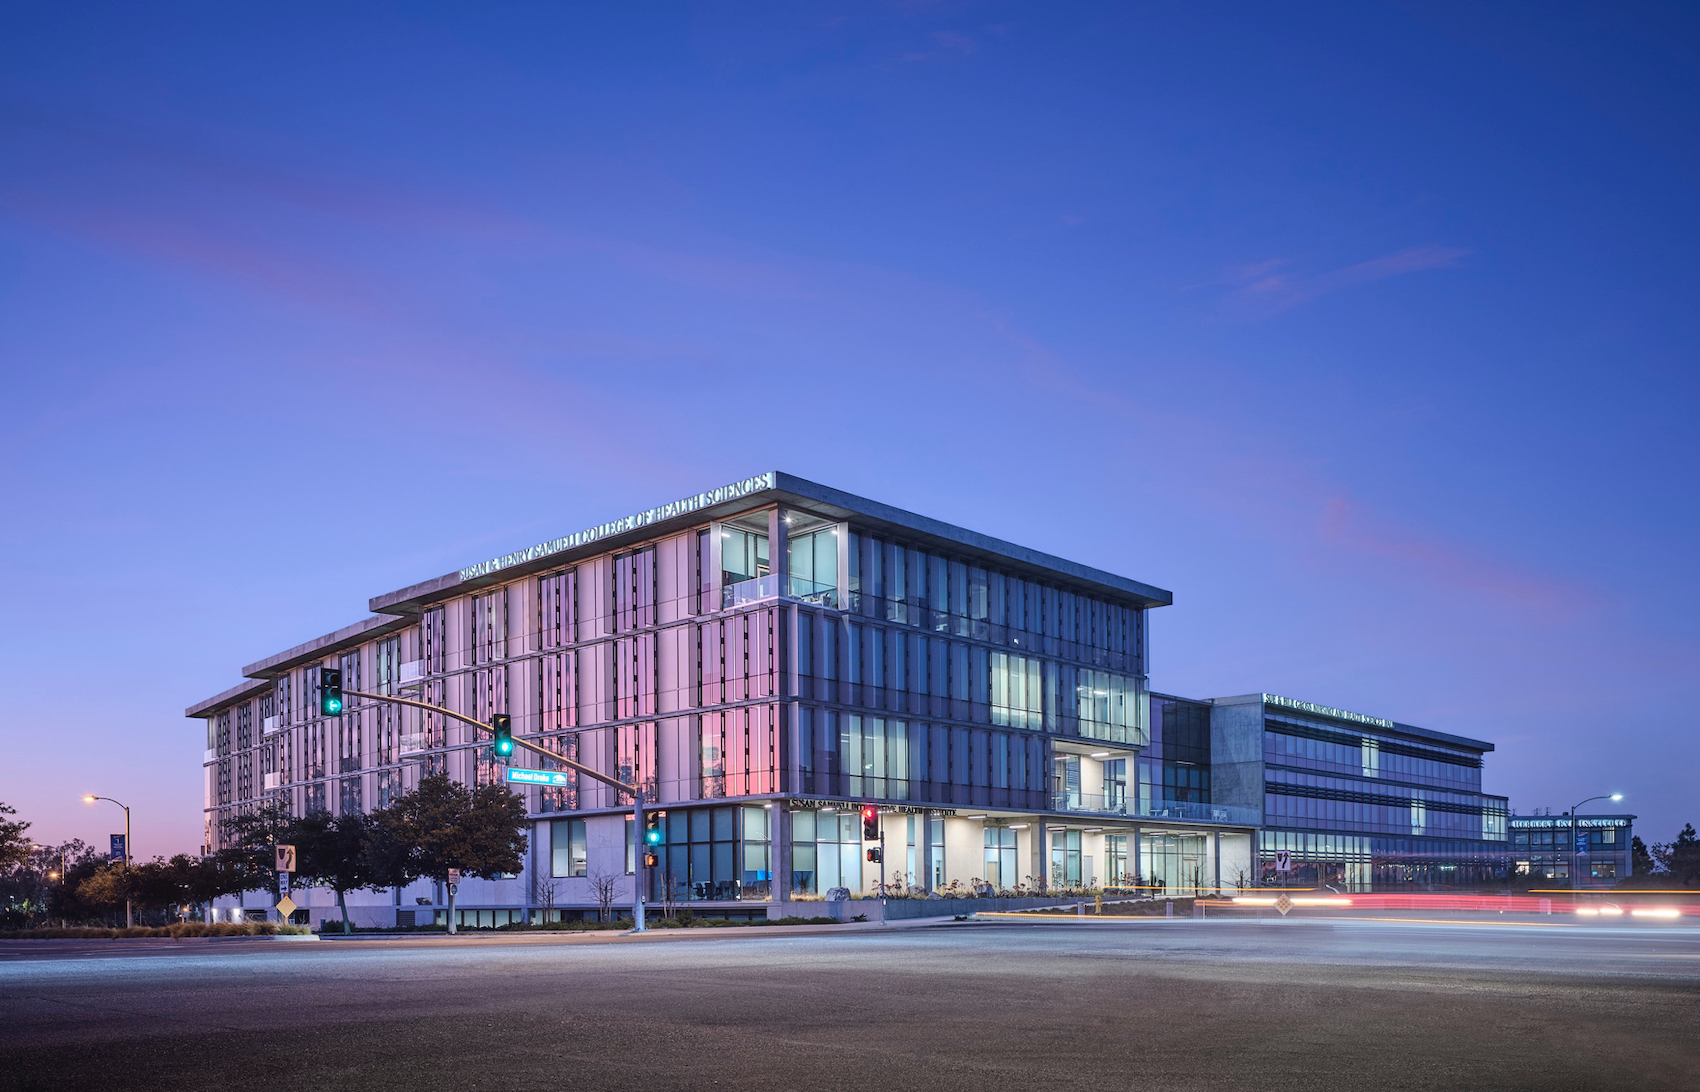 New UC Irvine health sciences building supports aim to become national model for integrative health